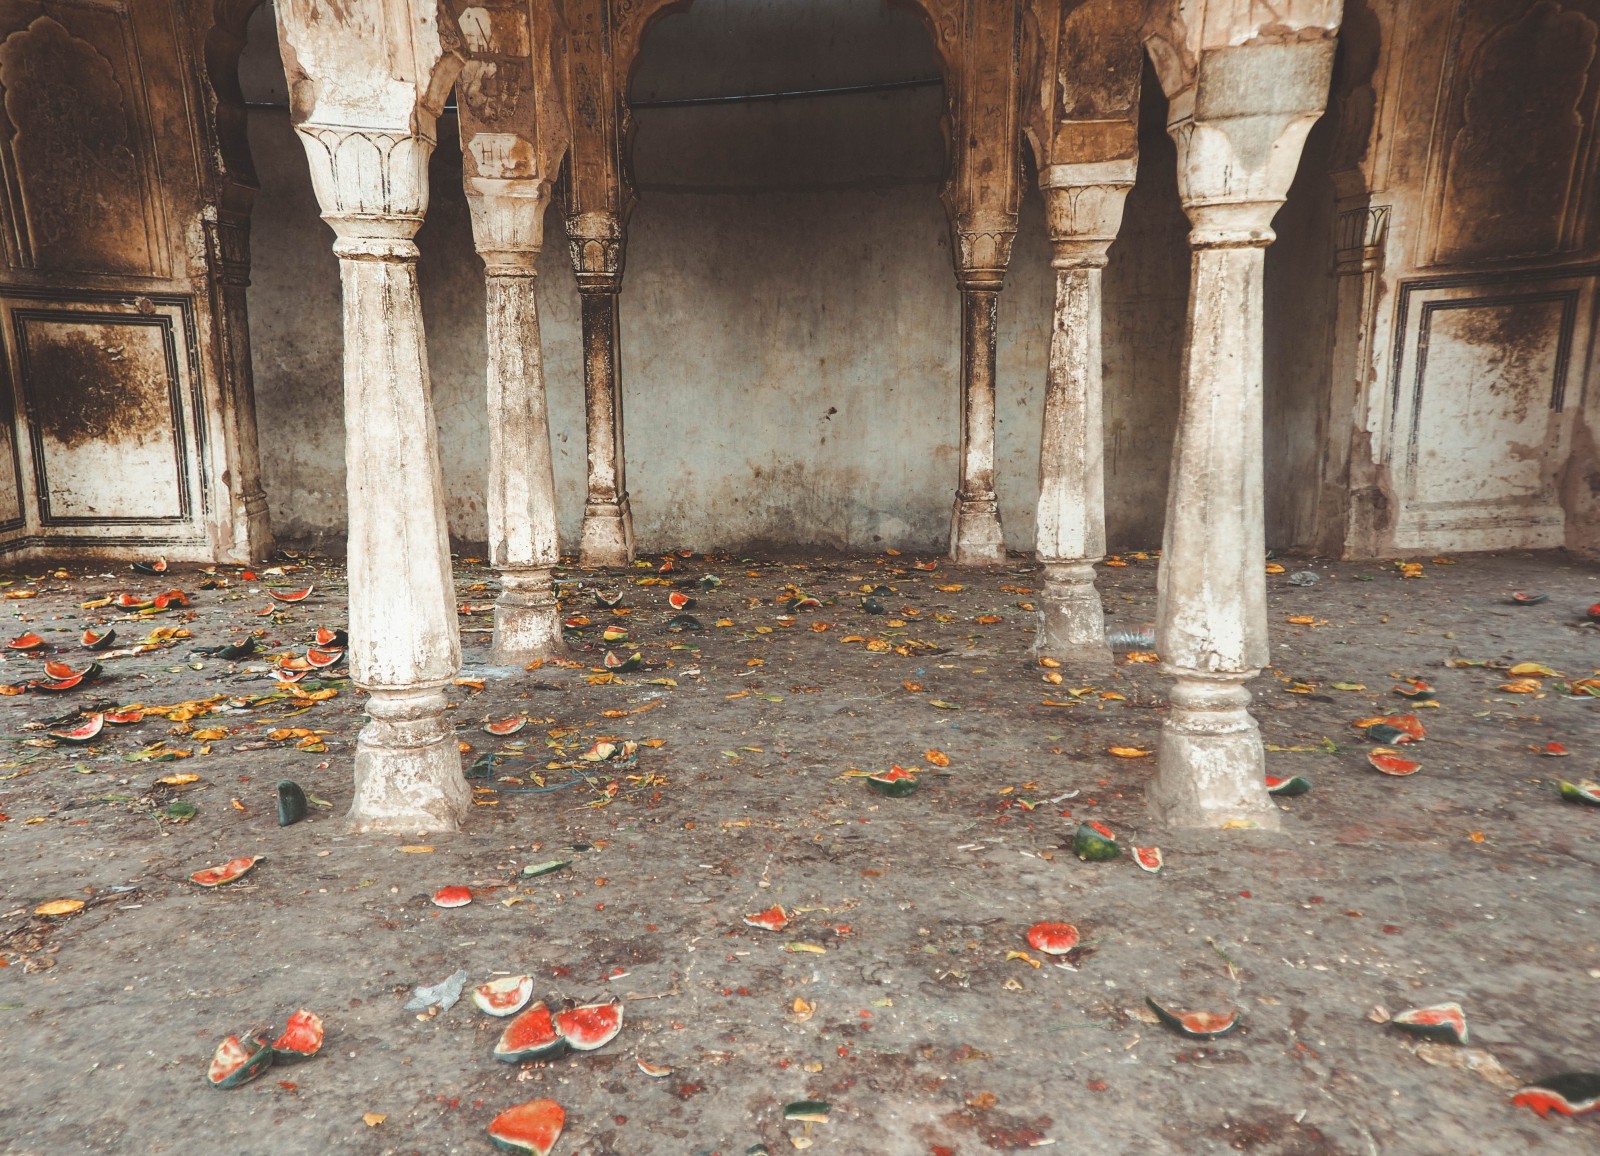 leftovers in the temple in Jaipur